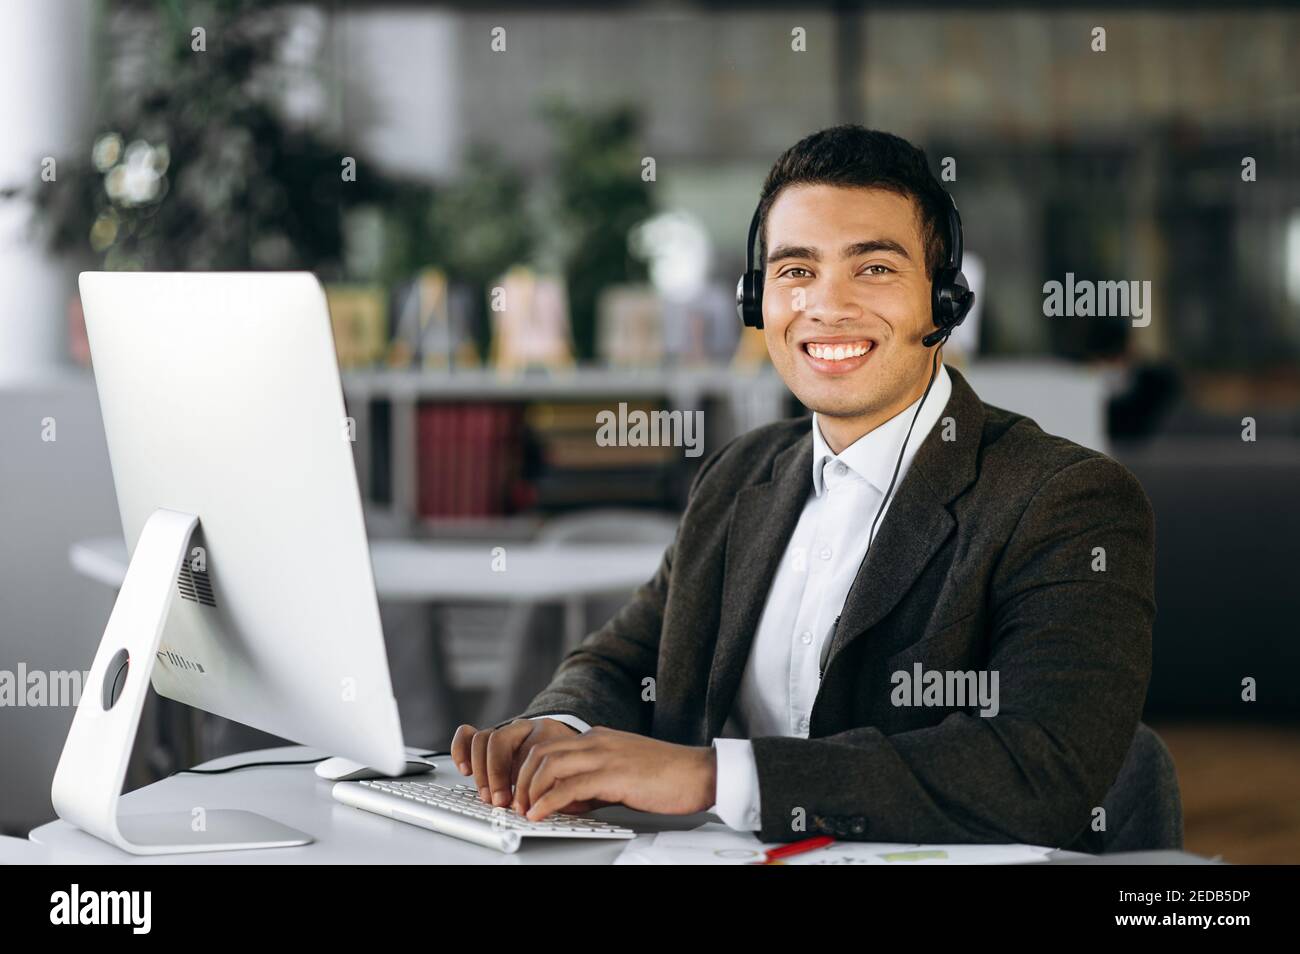 Support service, help desk. Portrait of a young successful hispanic call center worker, manager or entrepreneur sitting at work desk wearing headphones looking at the camera with a smile Stock Photo